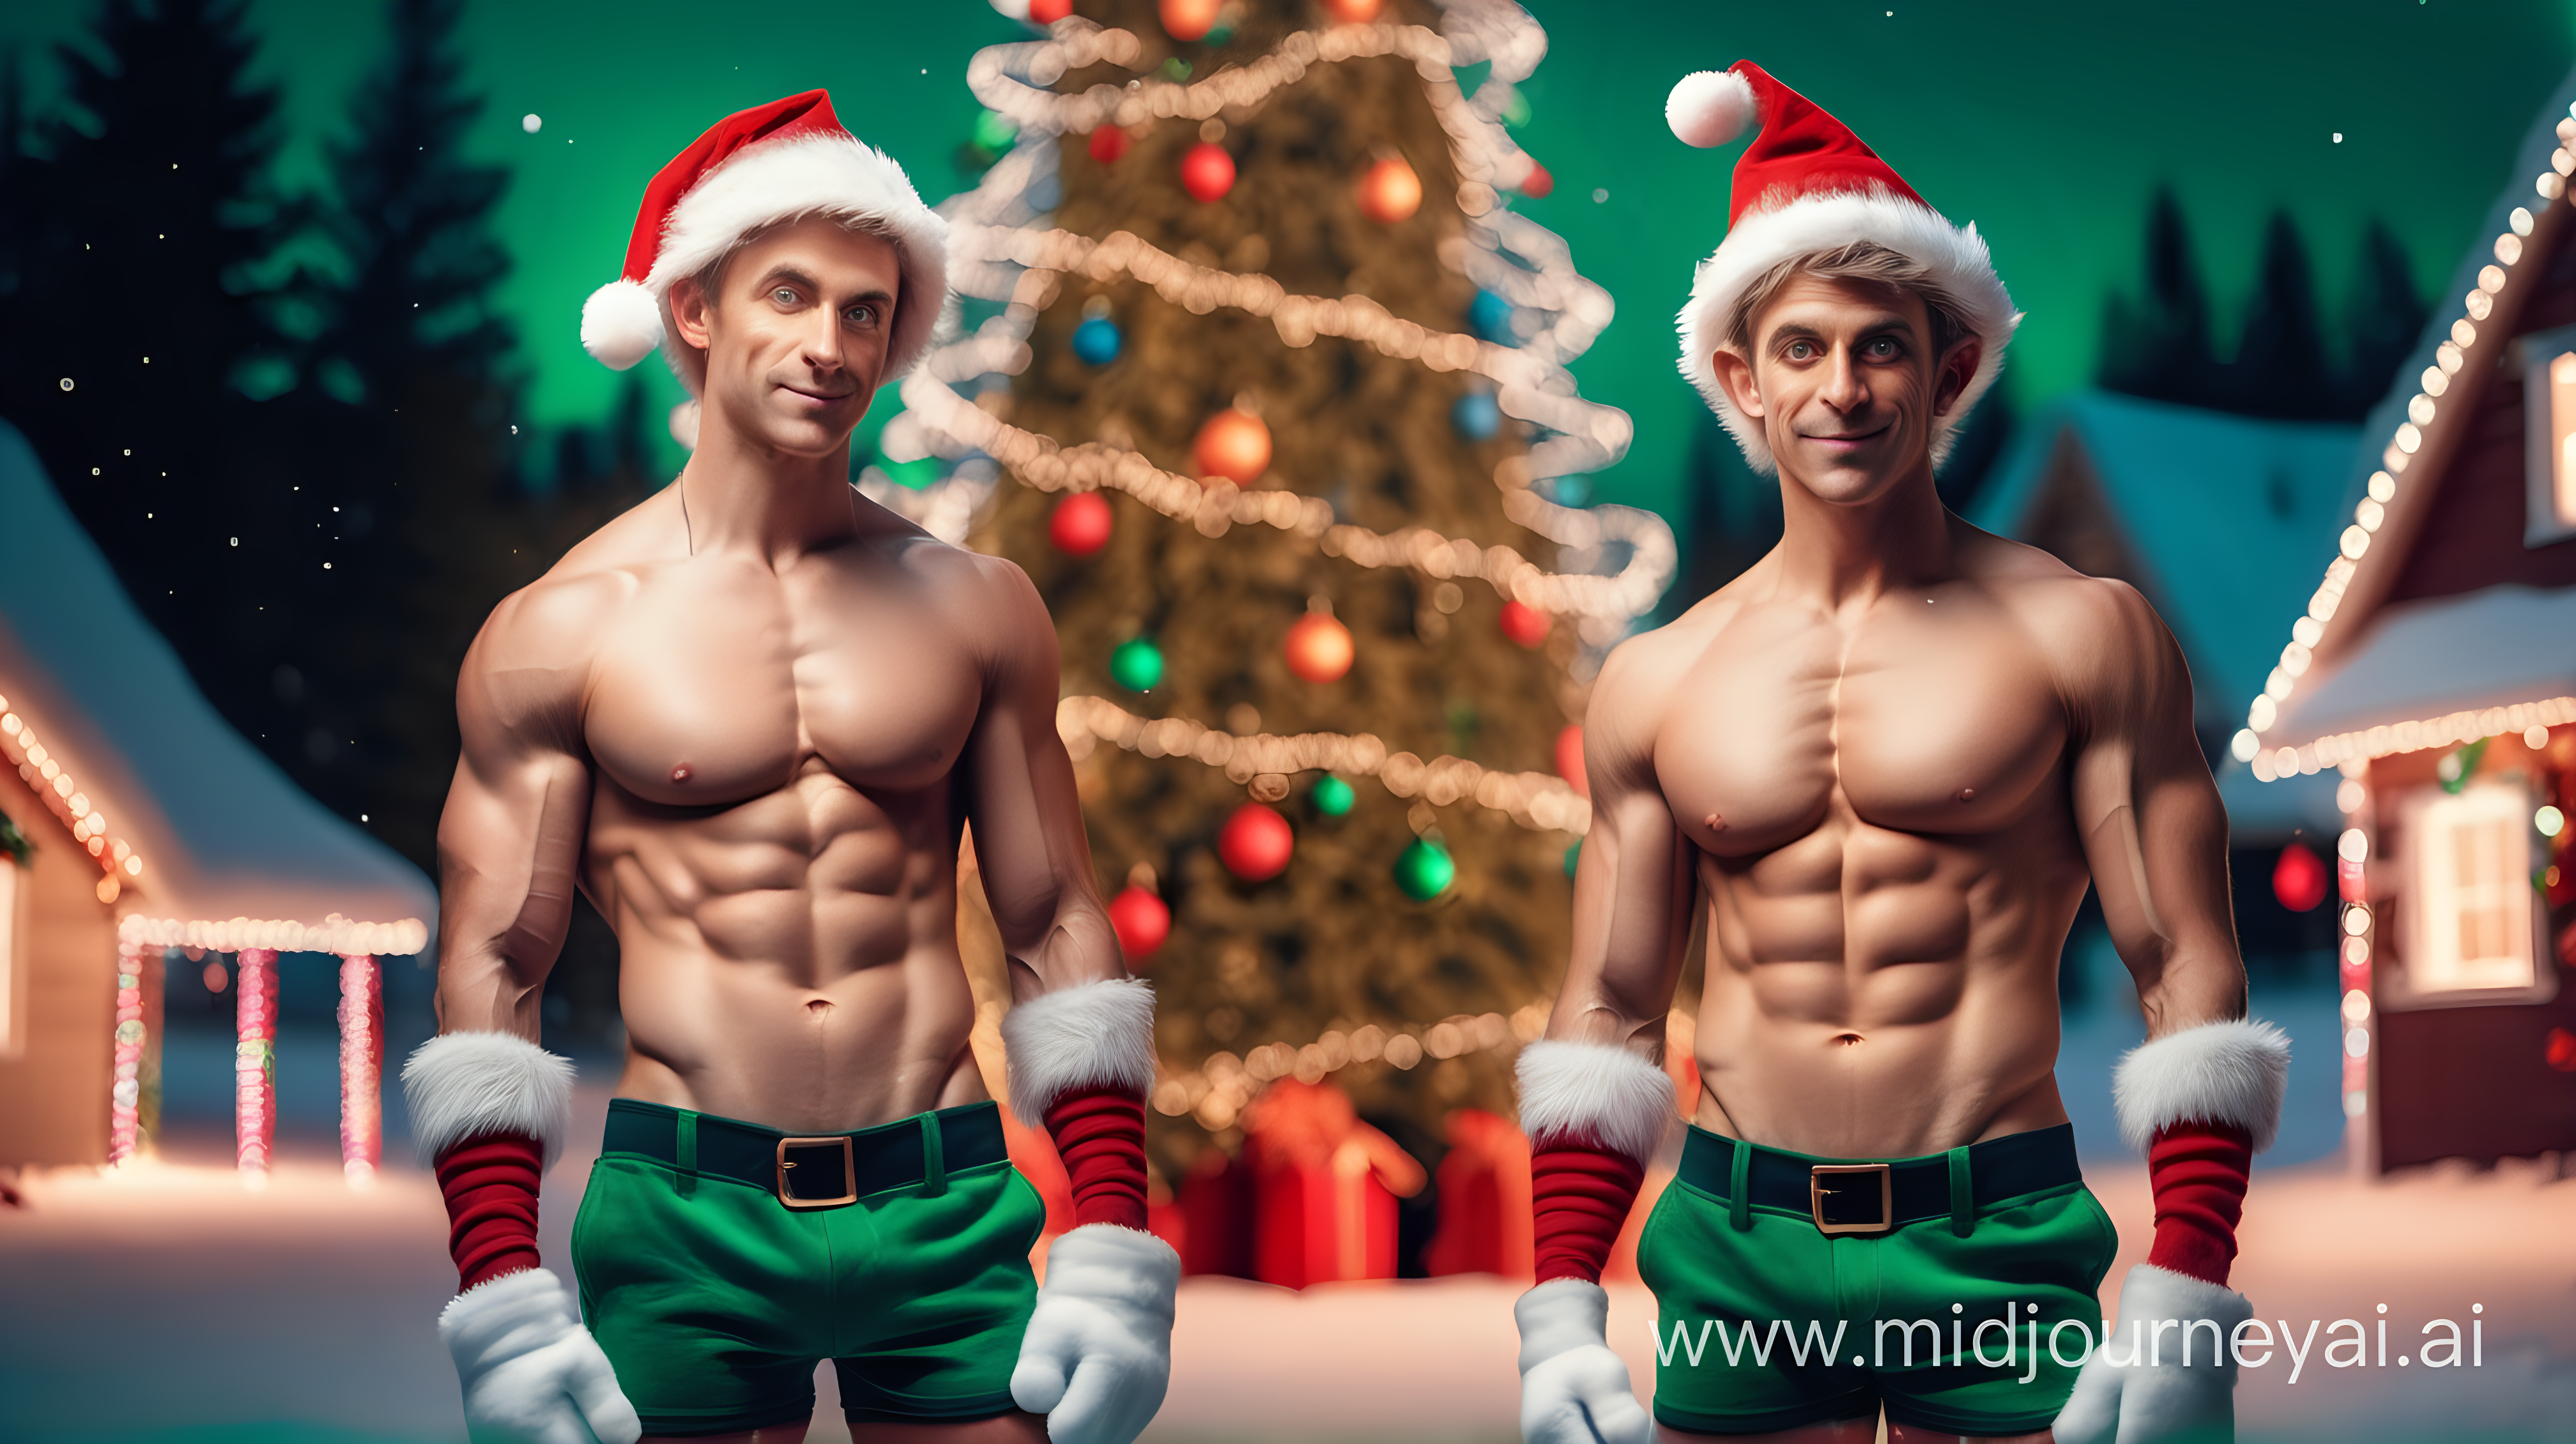 Photo of shirtless muscular male elves in front